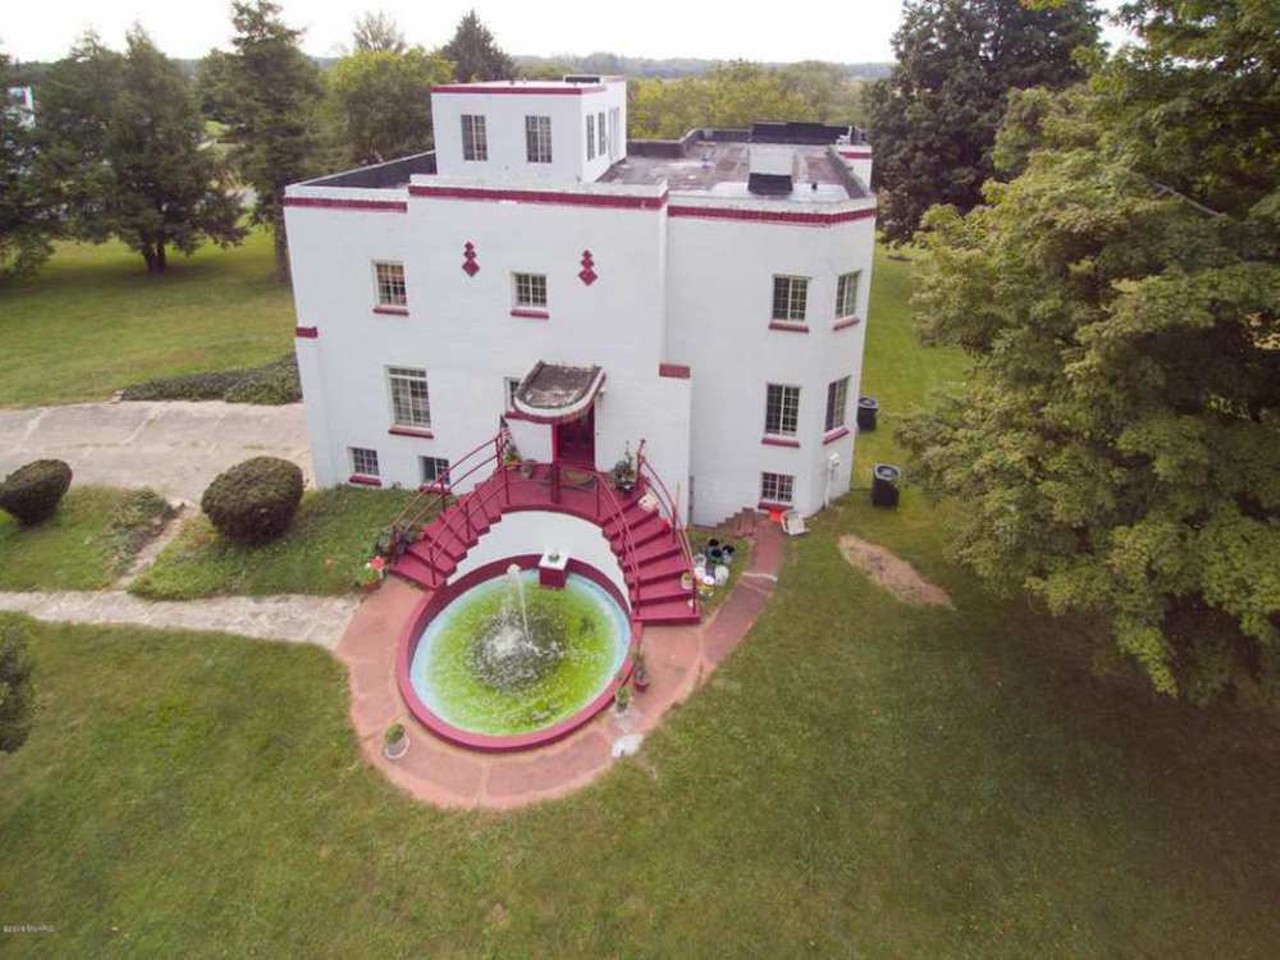 This strange and unusual $249k historic Hartford house gives us Tim Burton vibes &#151;&nbsp;let's take a tour